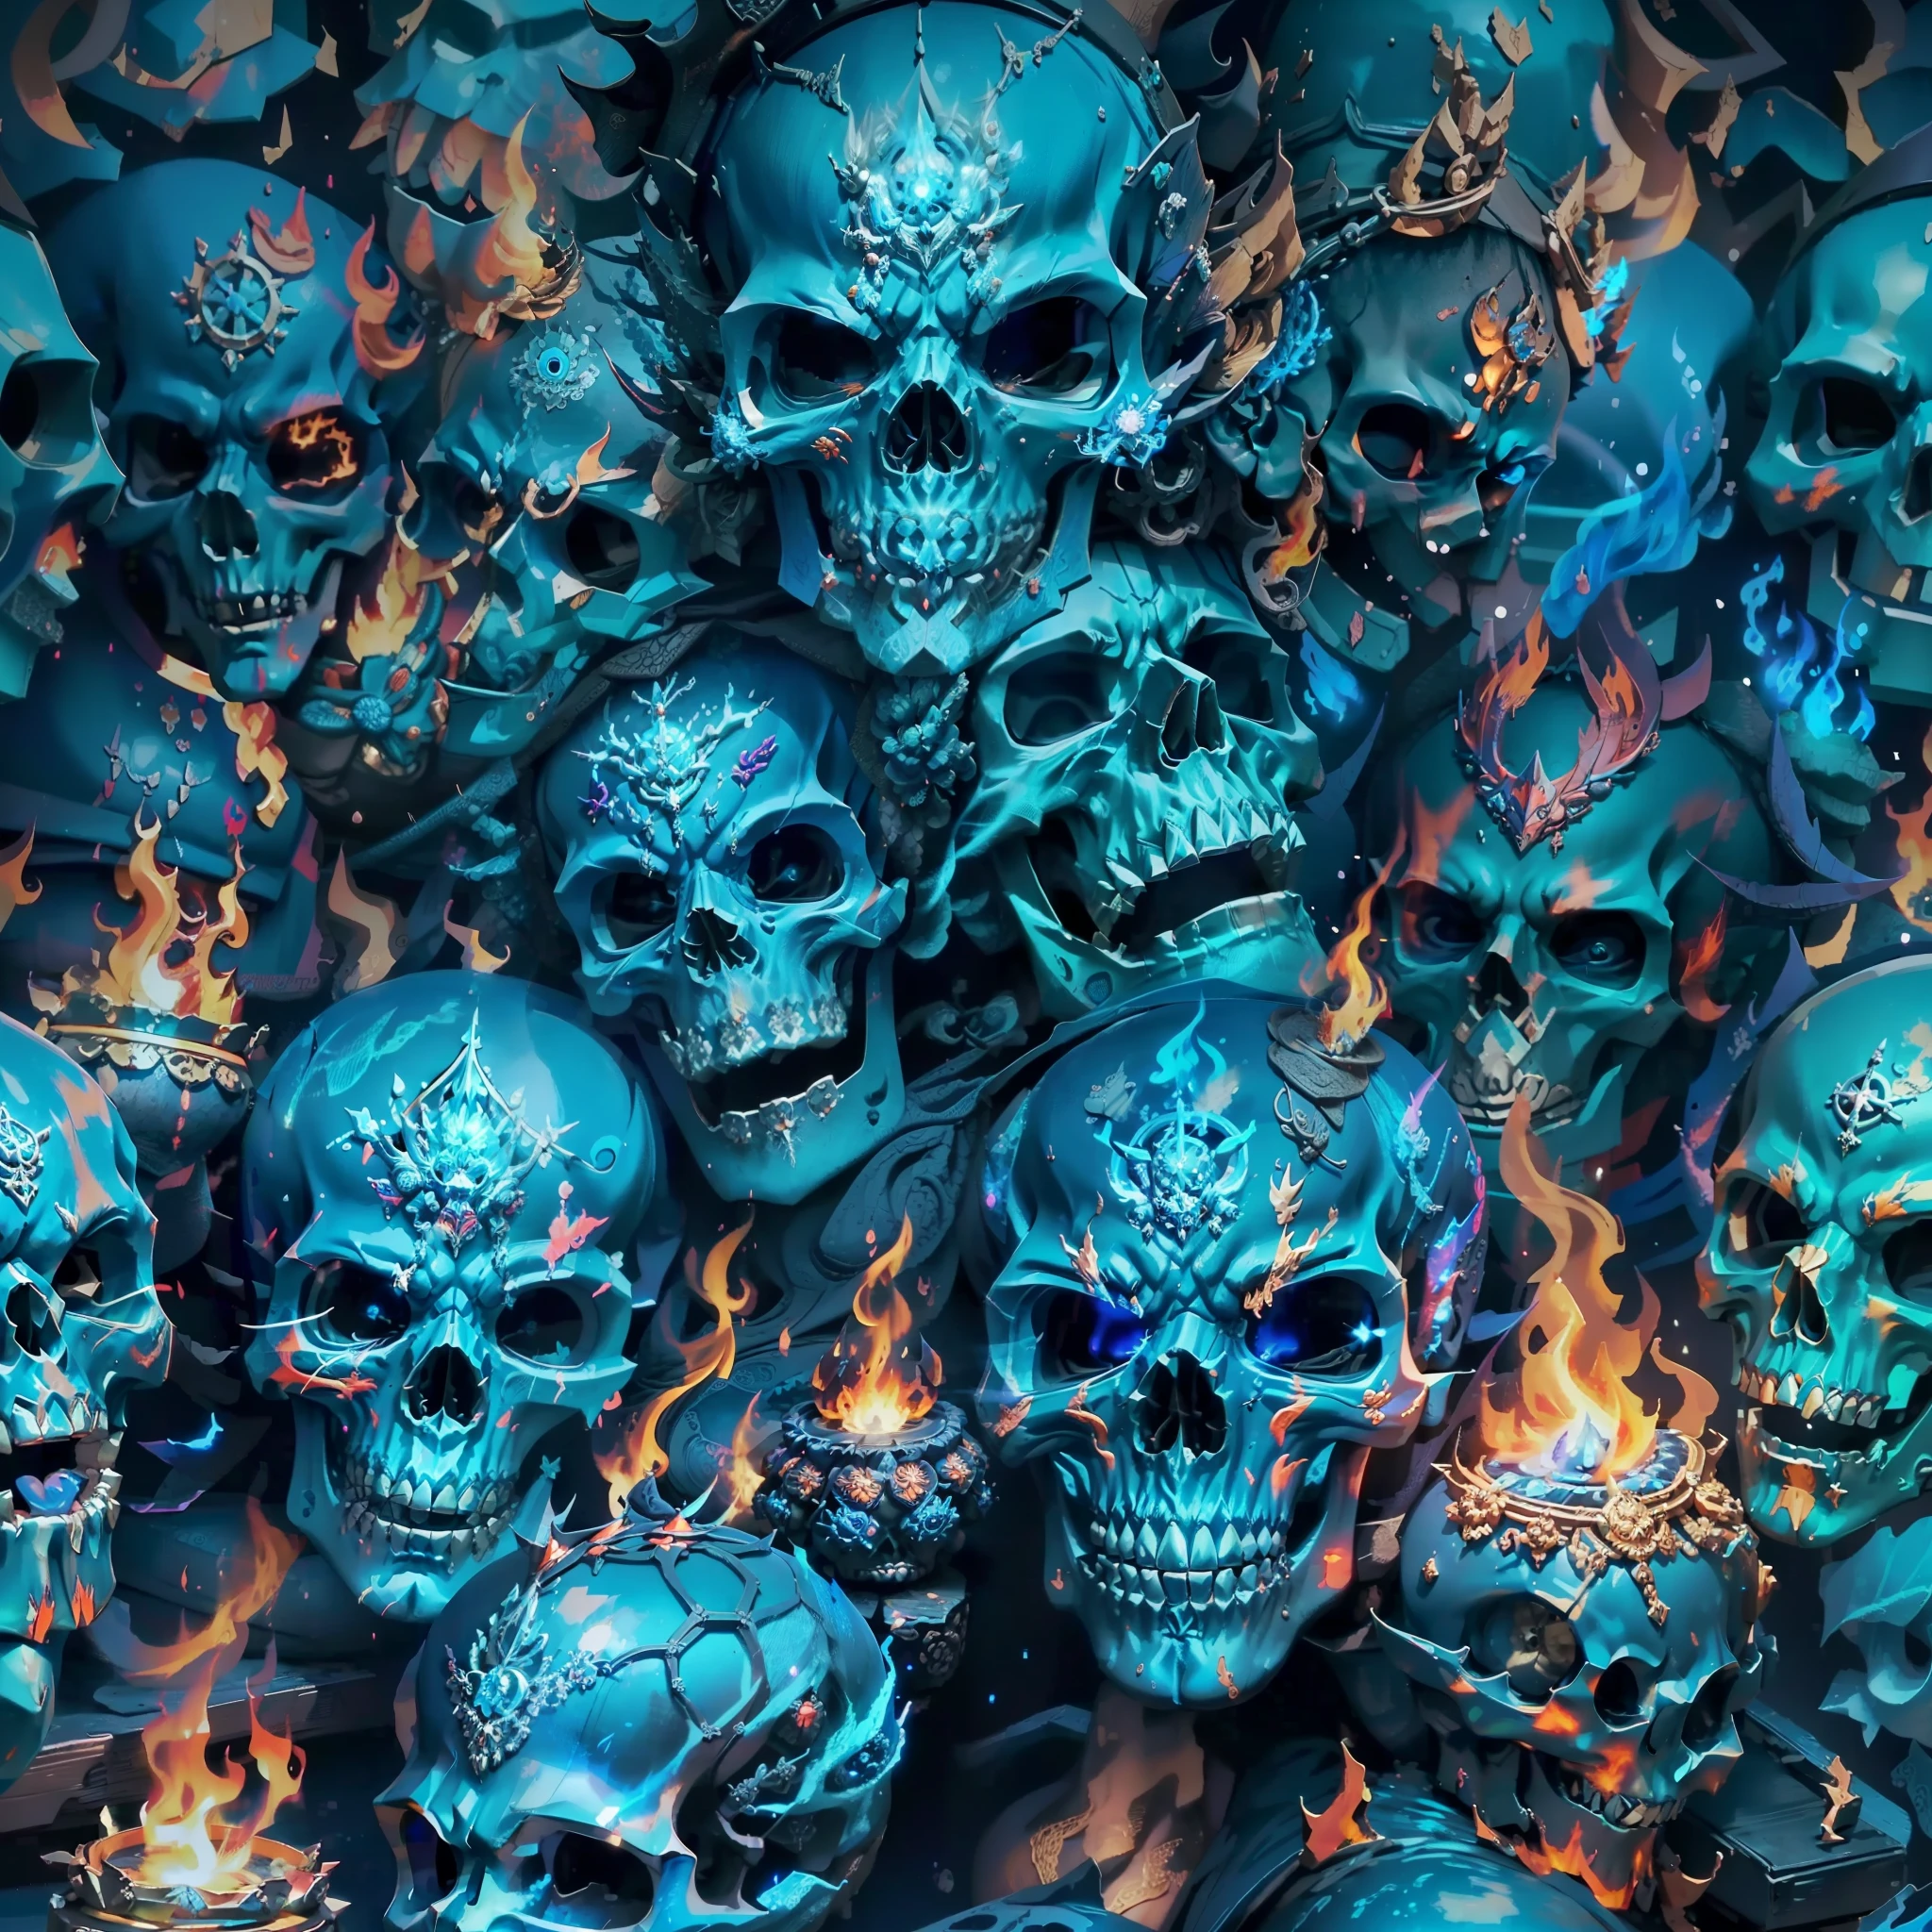 Close up of skull with blue flame on black background, Burning skull, fiery skull contemplating life, fantasy skull, Blue Flame, Burning Reaper, Breathe in the blue flames, Magic Blue Fire, bluefire, On the blue flame, death skull, bluefire!, Blue flames surround, emerging from blue fire, Sacred skull, morphing skulls, Blue Flame, Blue fireball